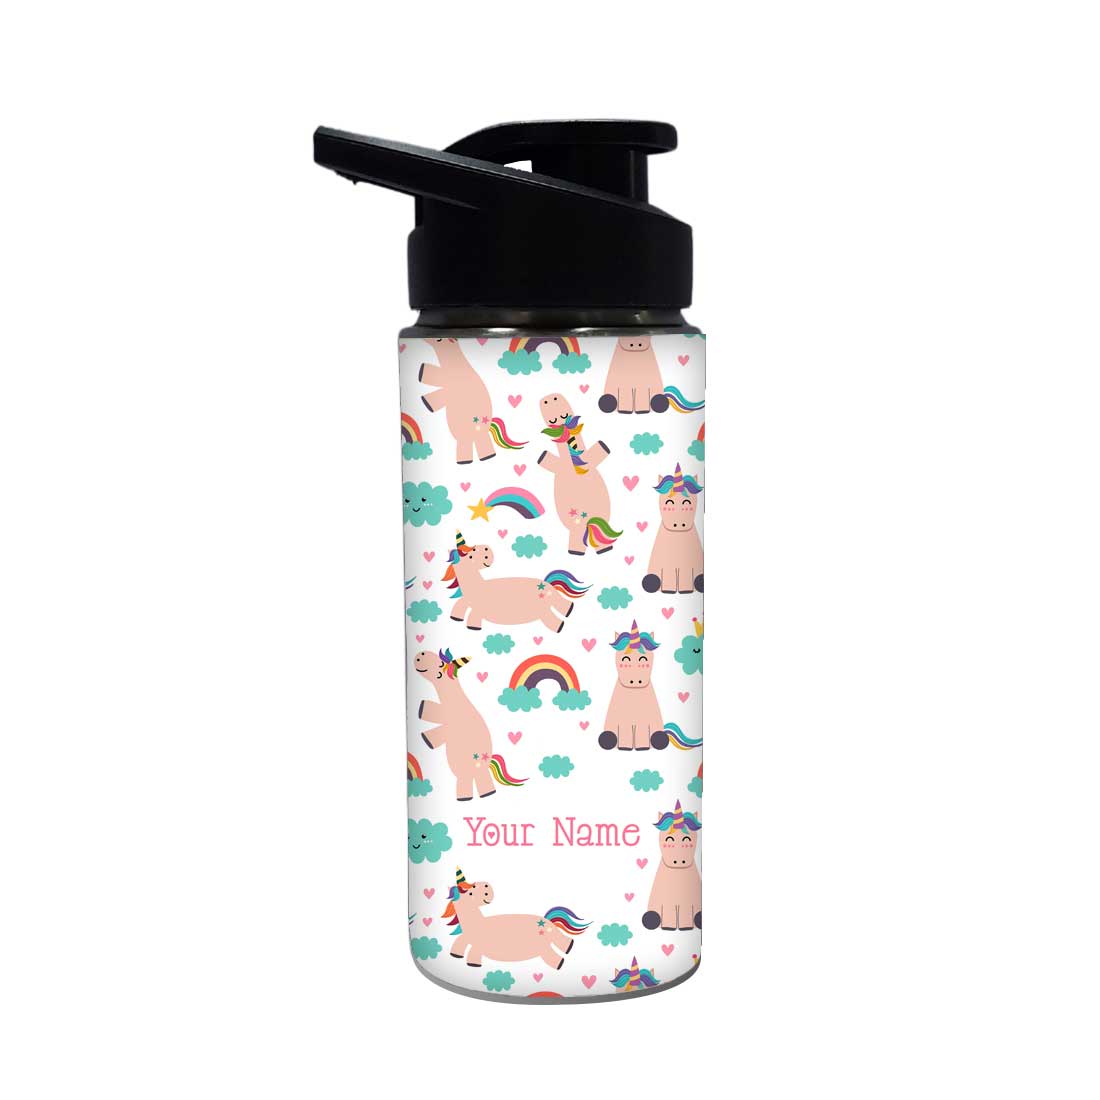 Customized Bottle with Name Sipper Bottles for Kids-Unicorn Nutcase